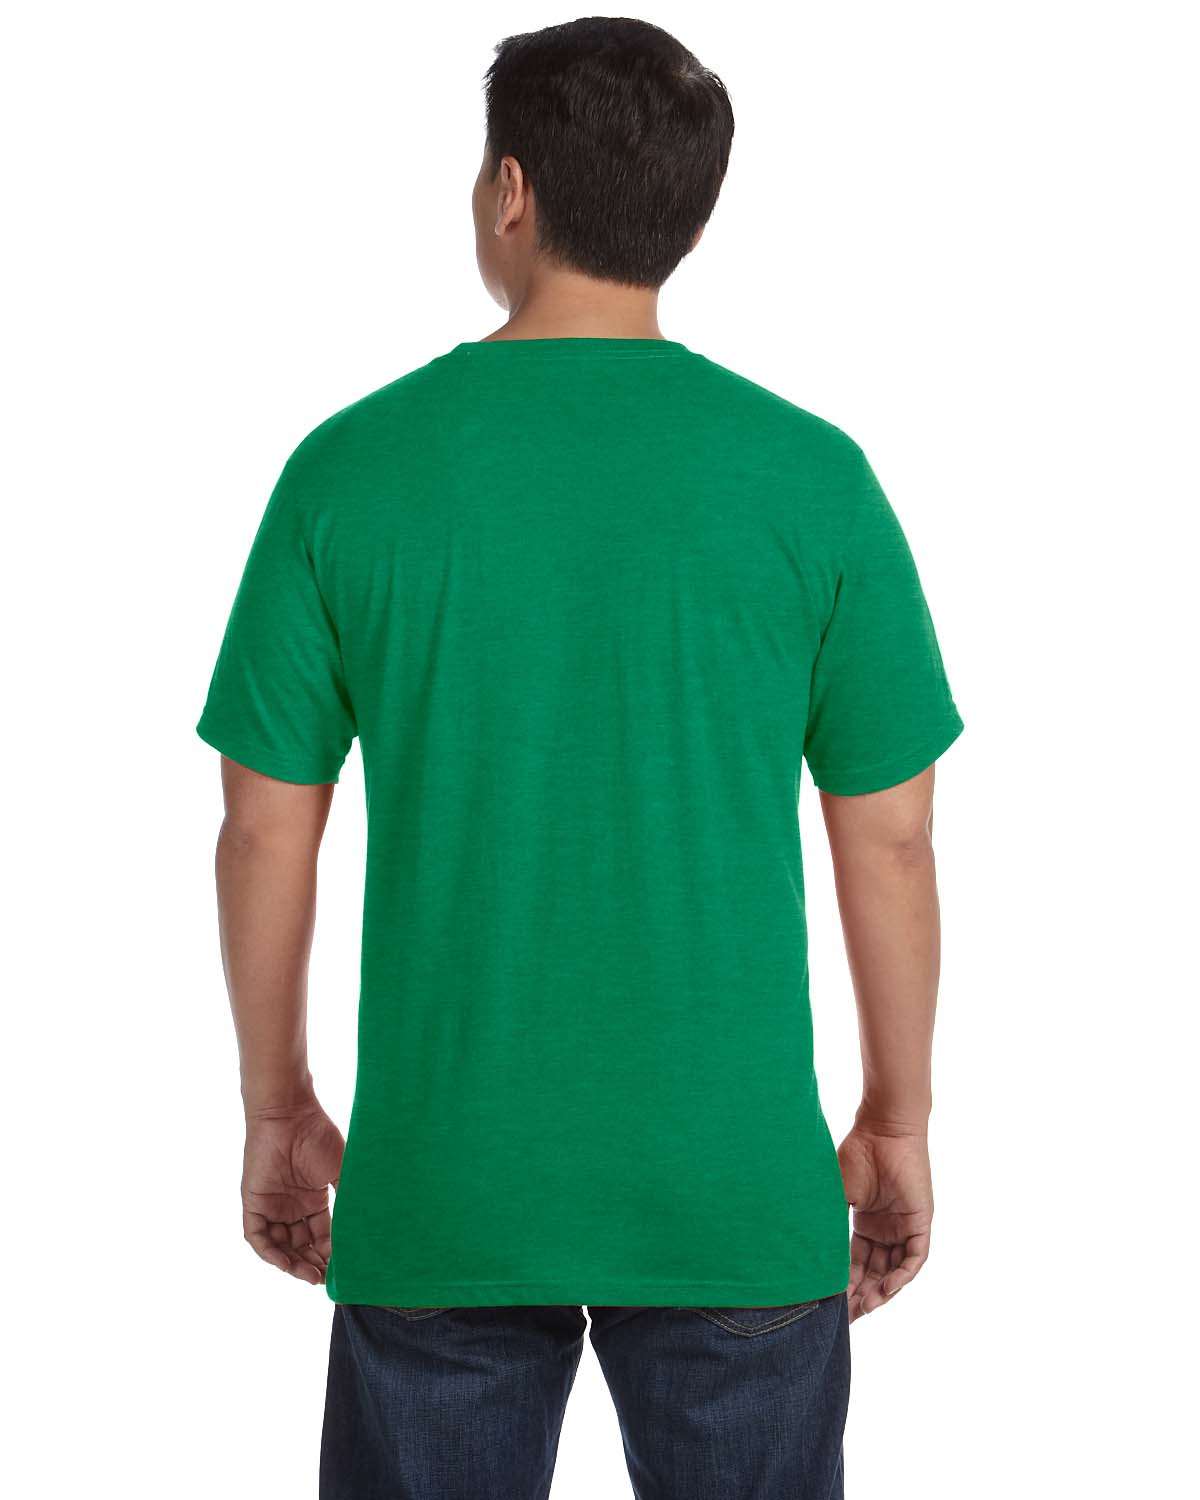 NEW Anvil Sustainable Organic Cotton/Recycled Polyester BIG 2-3XL T ...